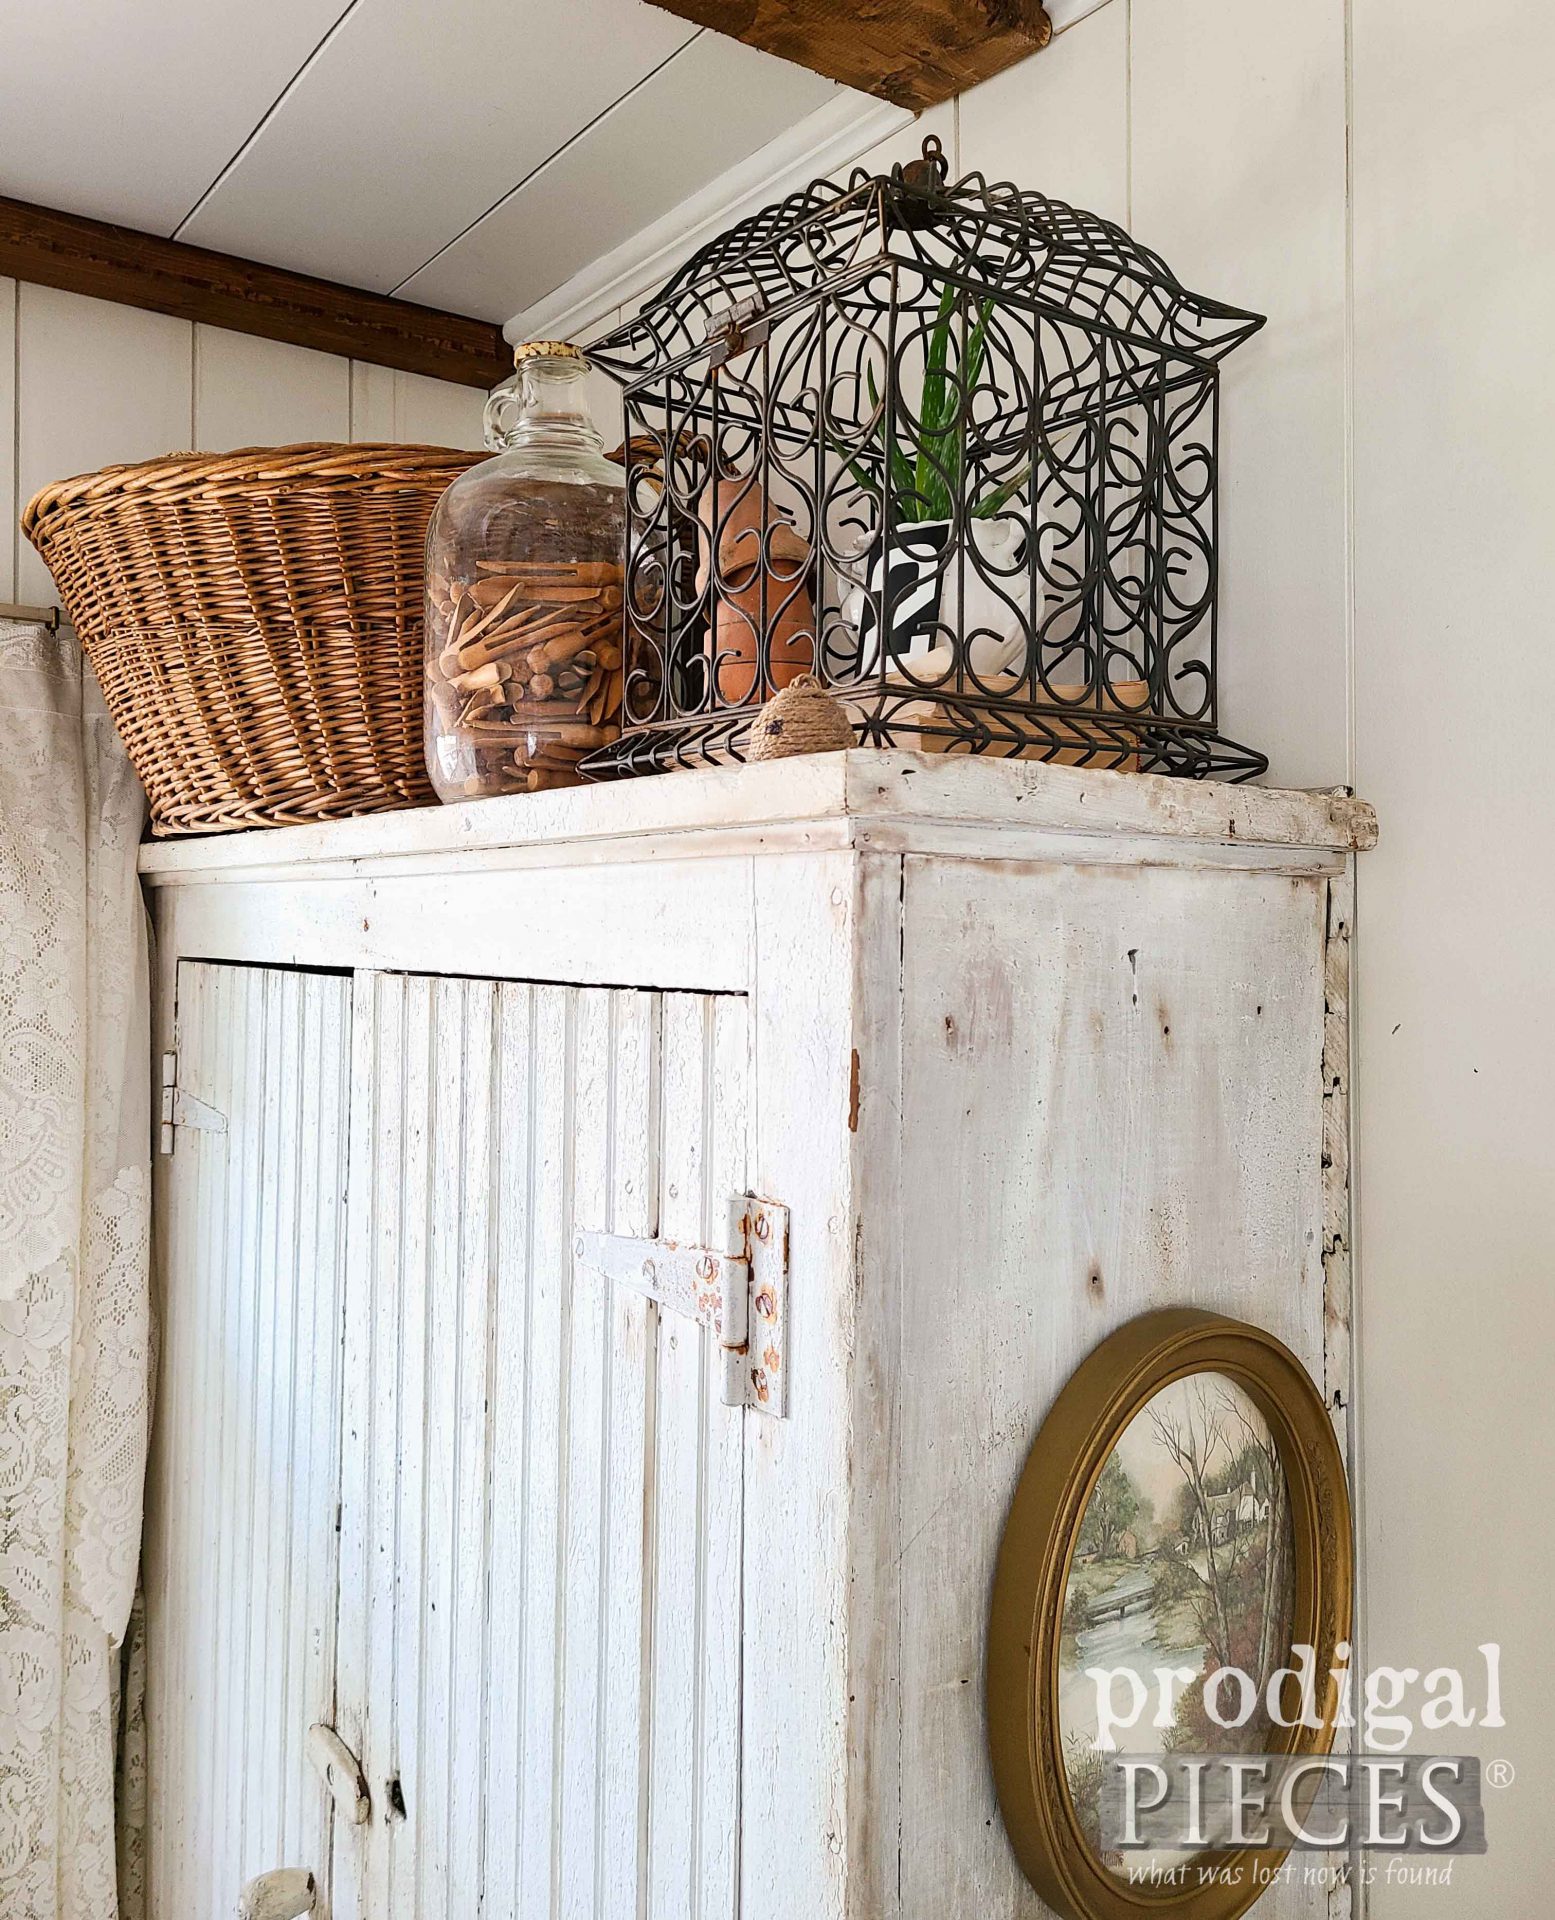 Vintage Bird Cage Filled for Spring Decor by Larissa of Prodigal Pieces | prodigalpieces.com #prodigalpieces #farmhouse #bedroom